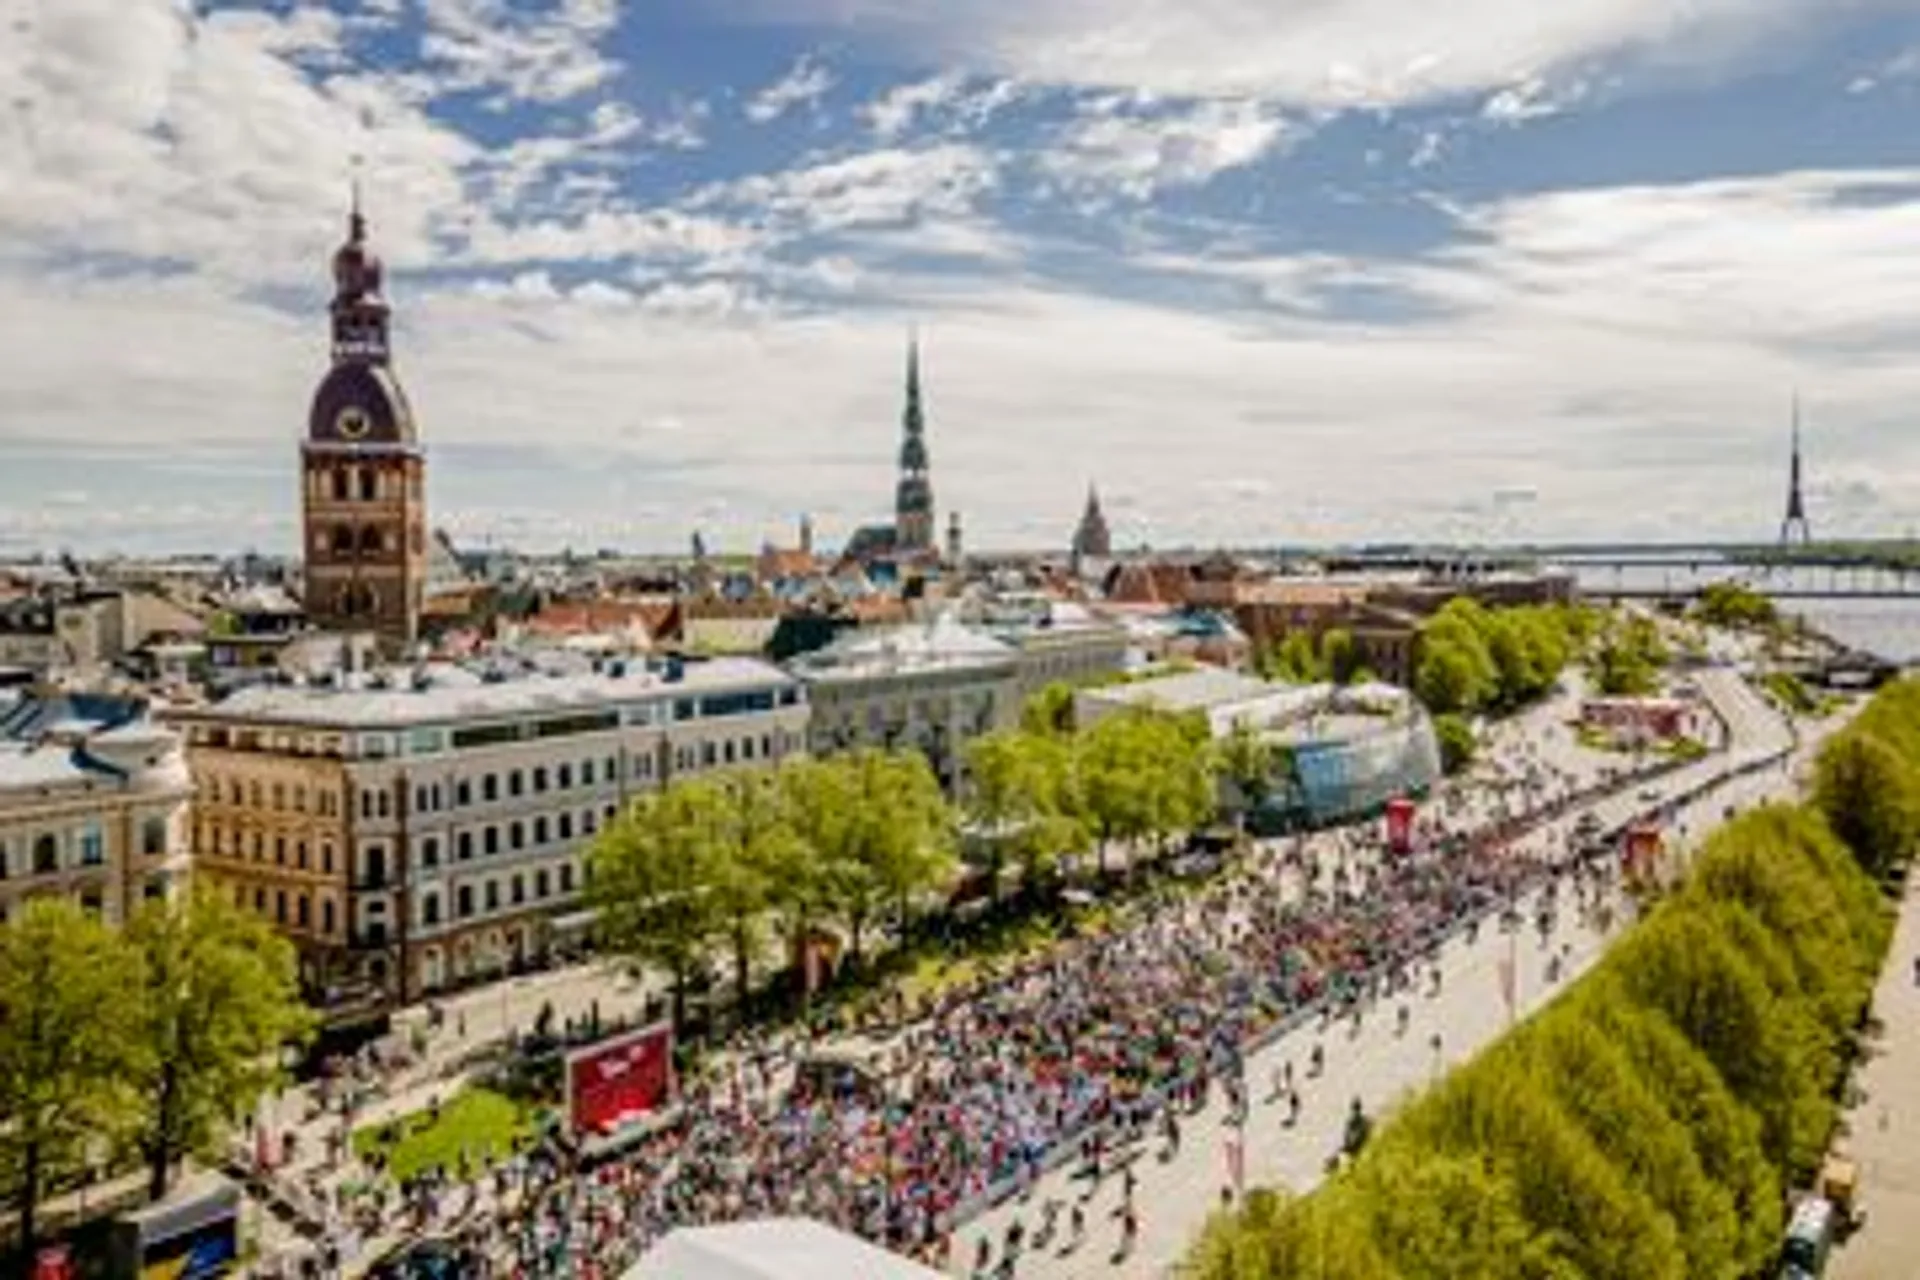 News Mass registration opens for the inaugural World Athletics Road Running Championships in Riga